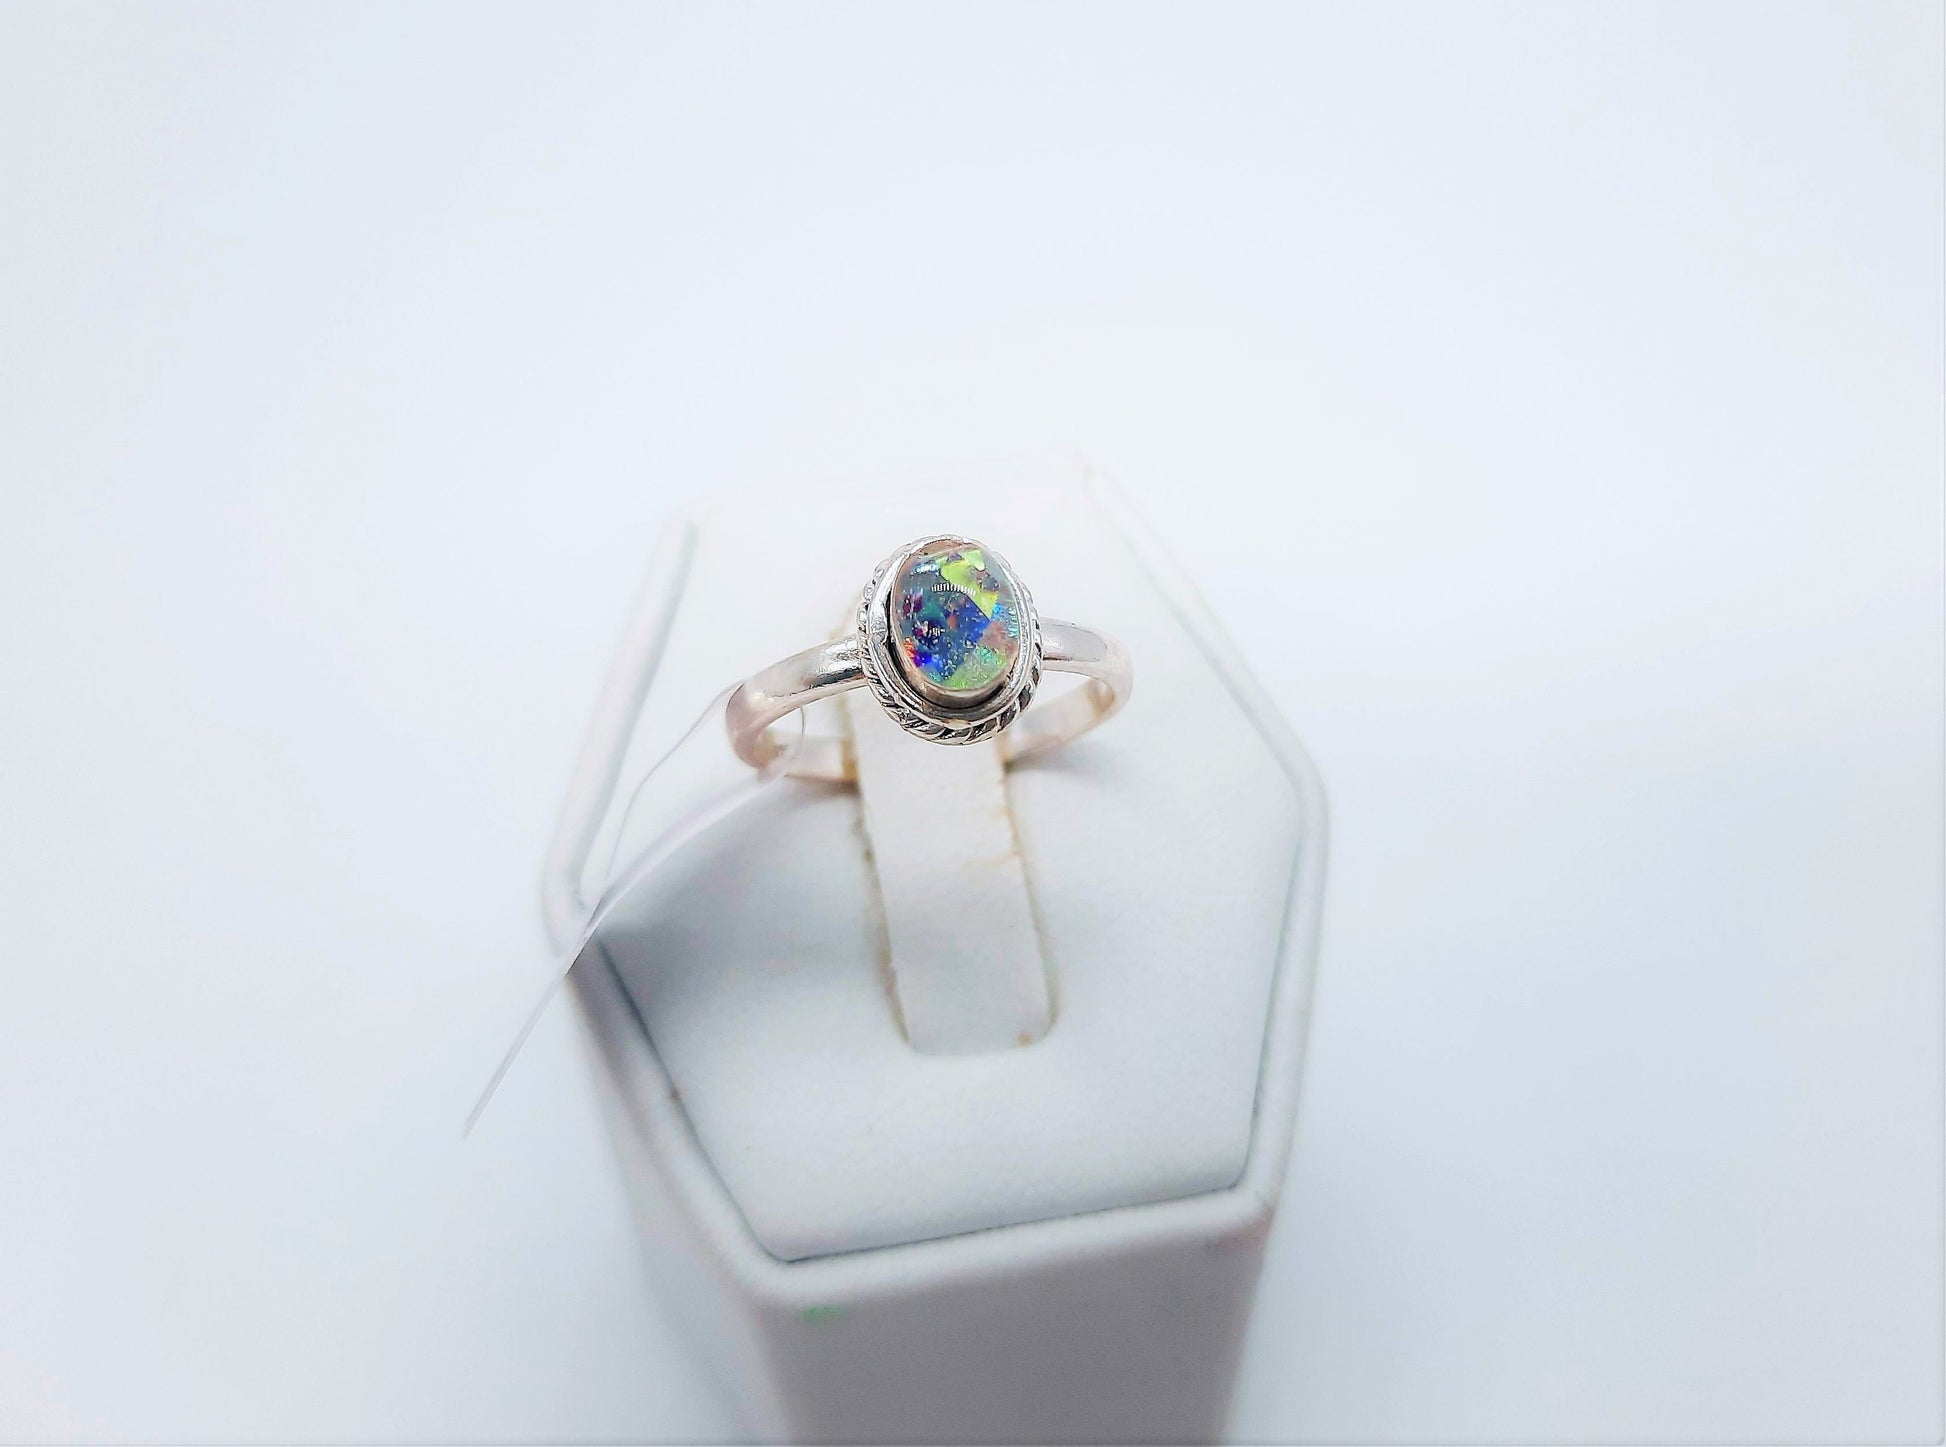 Handcrafted / Handmade Antiqued 925 Sterling Silver Ring, Twisted Rope Design, Iridescent Aurora Borealis, Domed with Holographic Resin